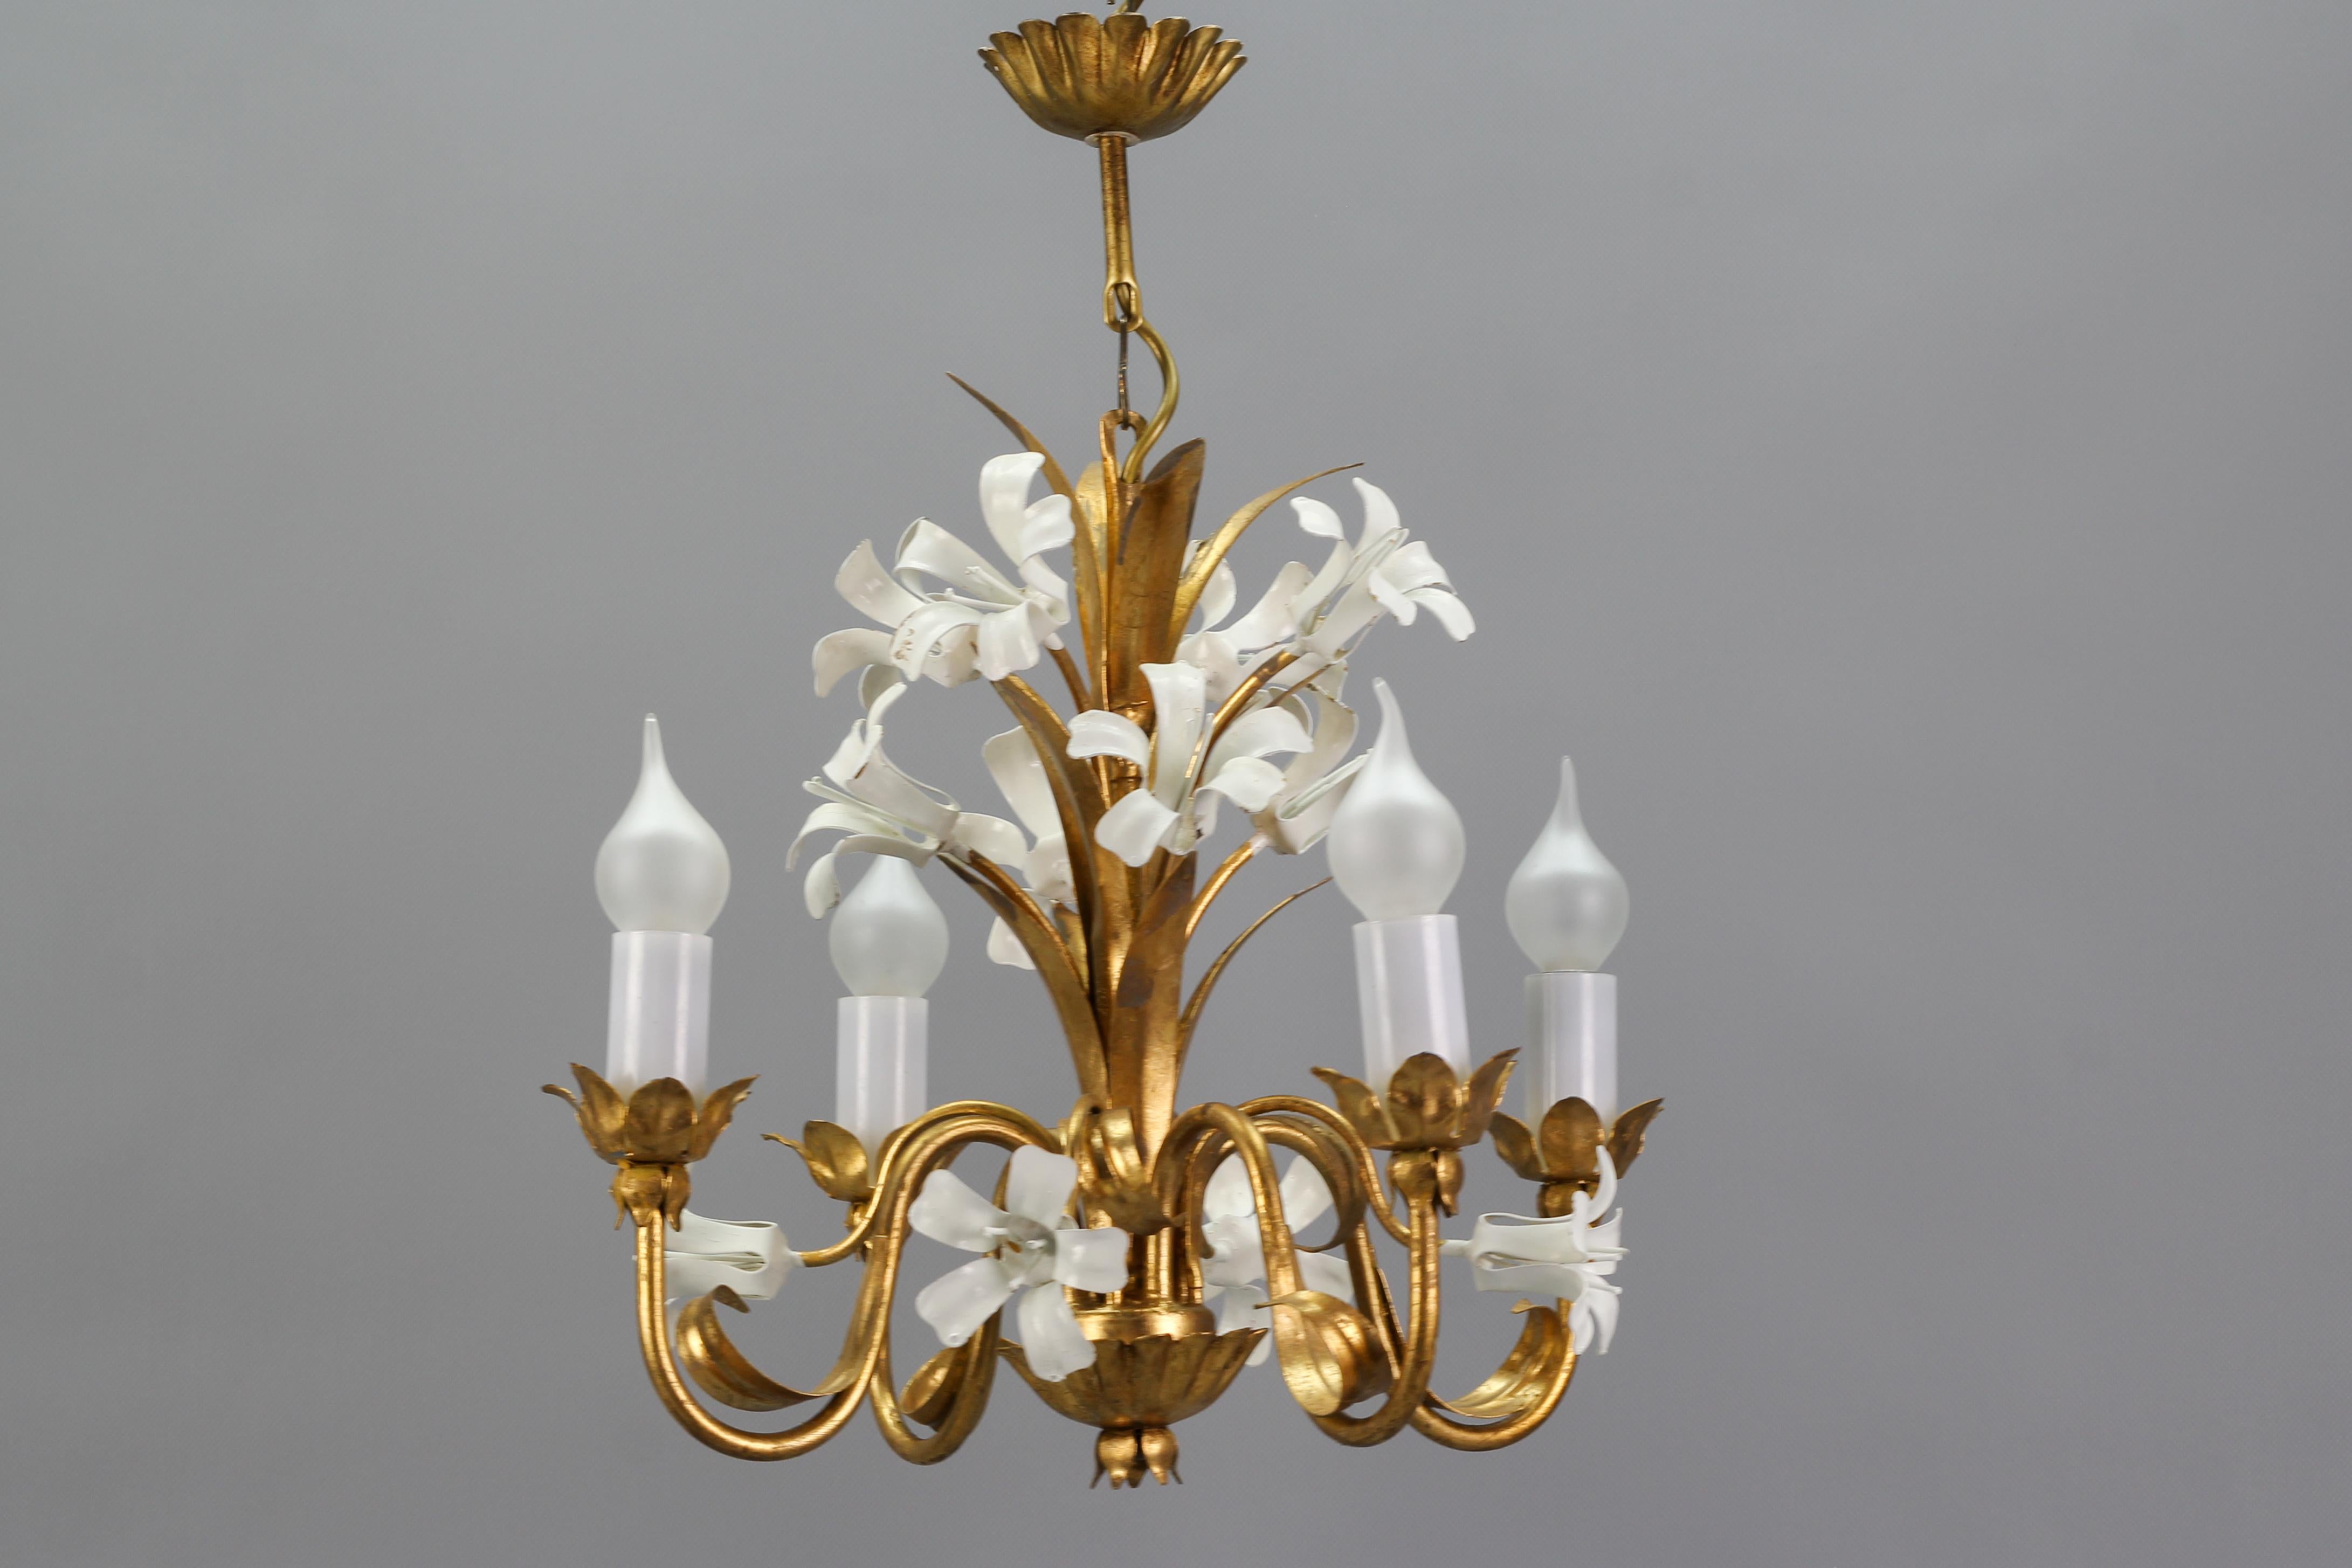 A beautiful Italian gilt metal four-light chandelier from the 1970s. This adorable Hollywood Regency-style golden metal light fixture is adorned with charming flowers - white painted lilies and golden leaves. 
Four sockets for E14-size light